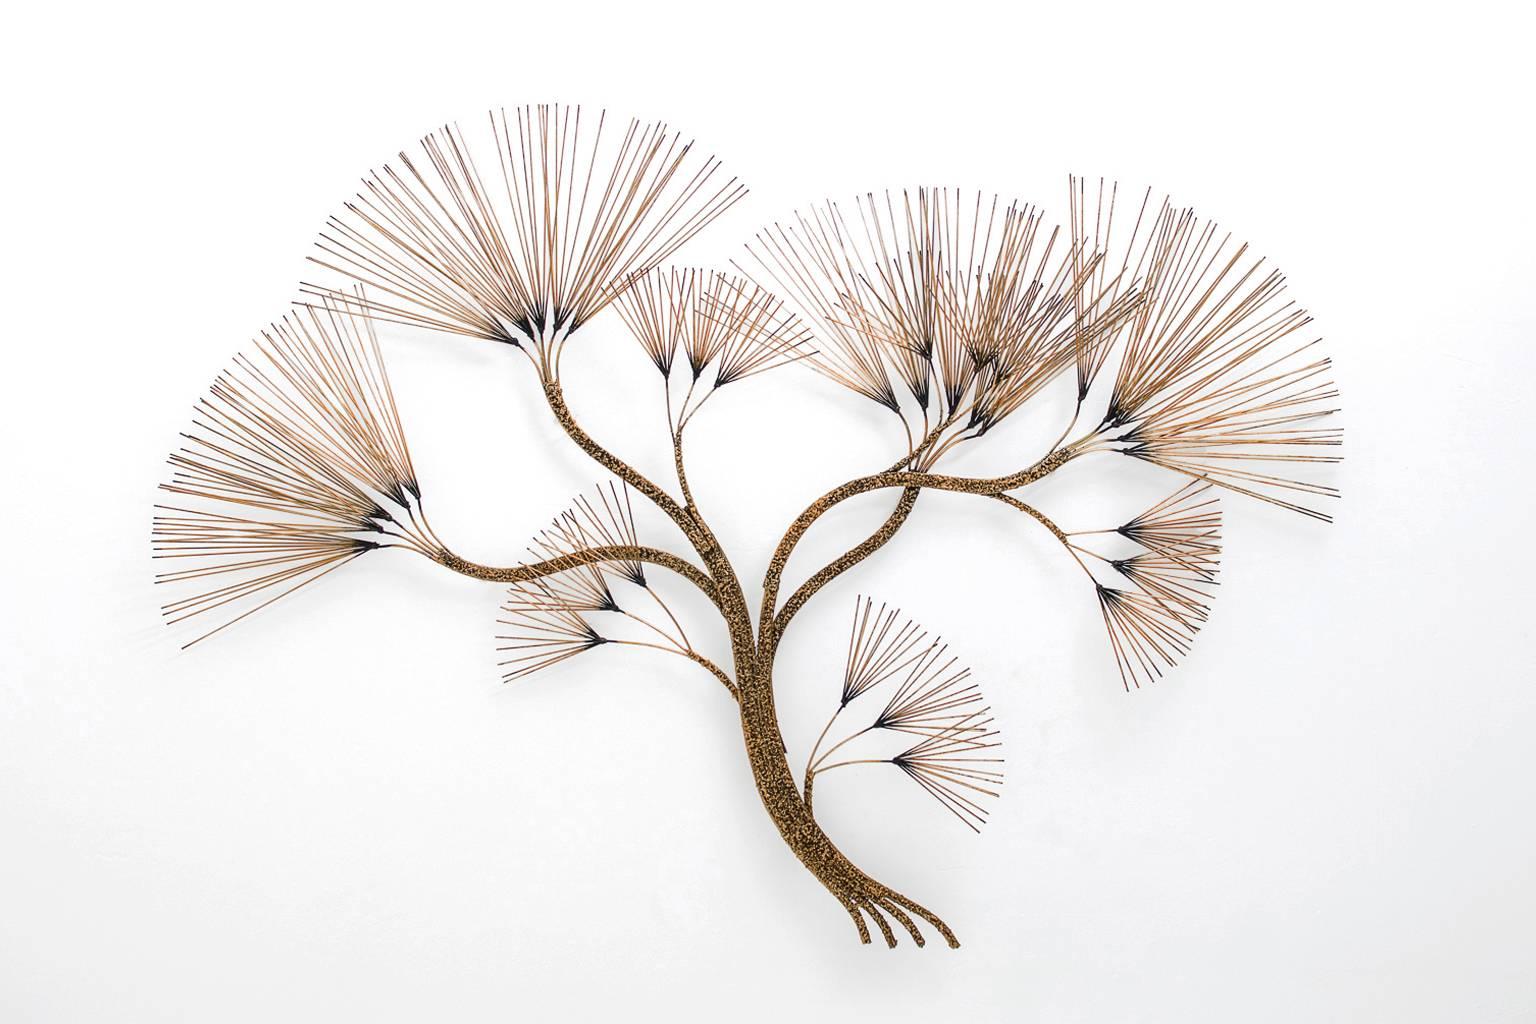 Brass wall sculpture by Curtis Jere, USA, 1970s. Very decorative and impressive piece imagine a tree/bush. Very well made with a beautiful structure on the branches and a nice overall warm patine on the brass. 
The sculpture hangs (5 cm) from the